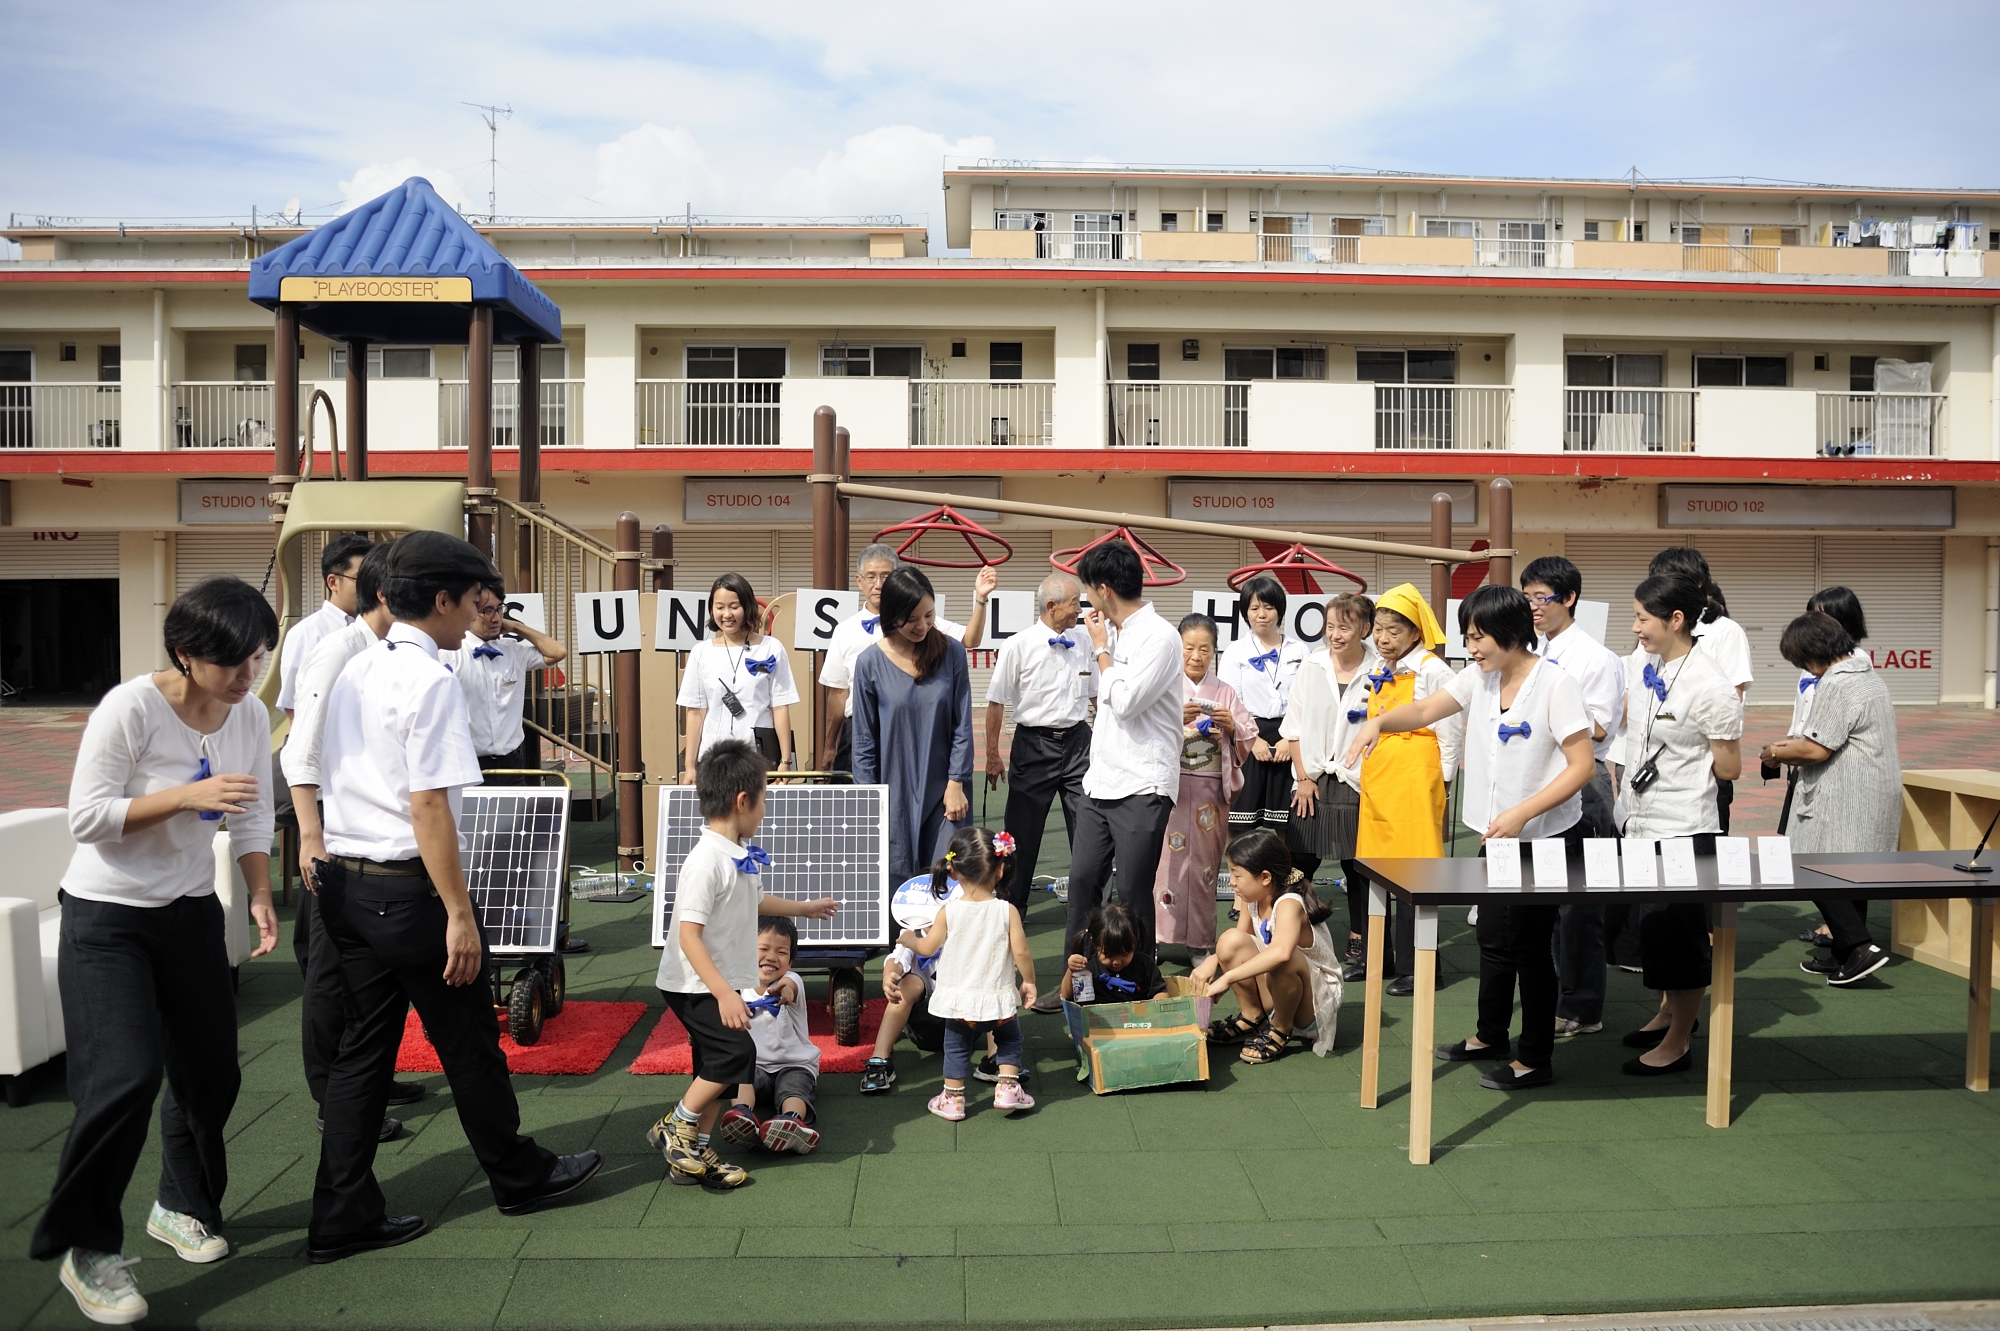 People dressed mostly in white, some with blue bowtie pins, standing in front of a lowrise building, with two solar panels.